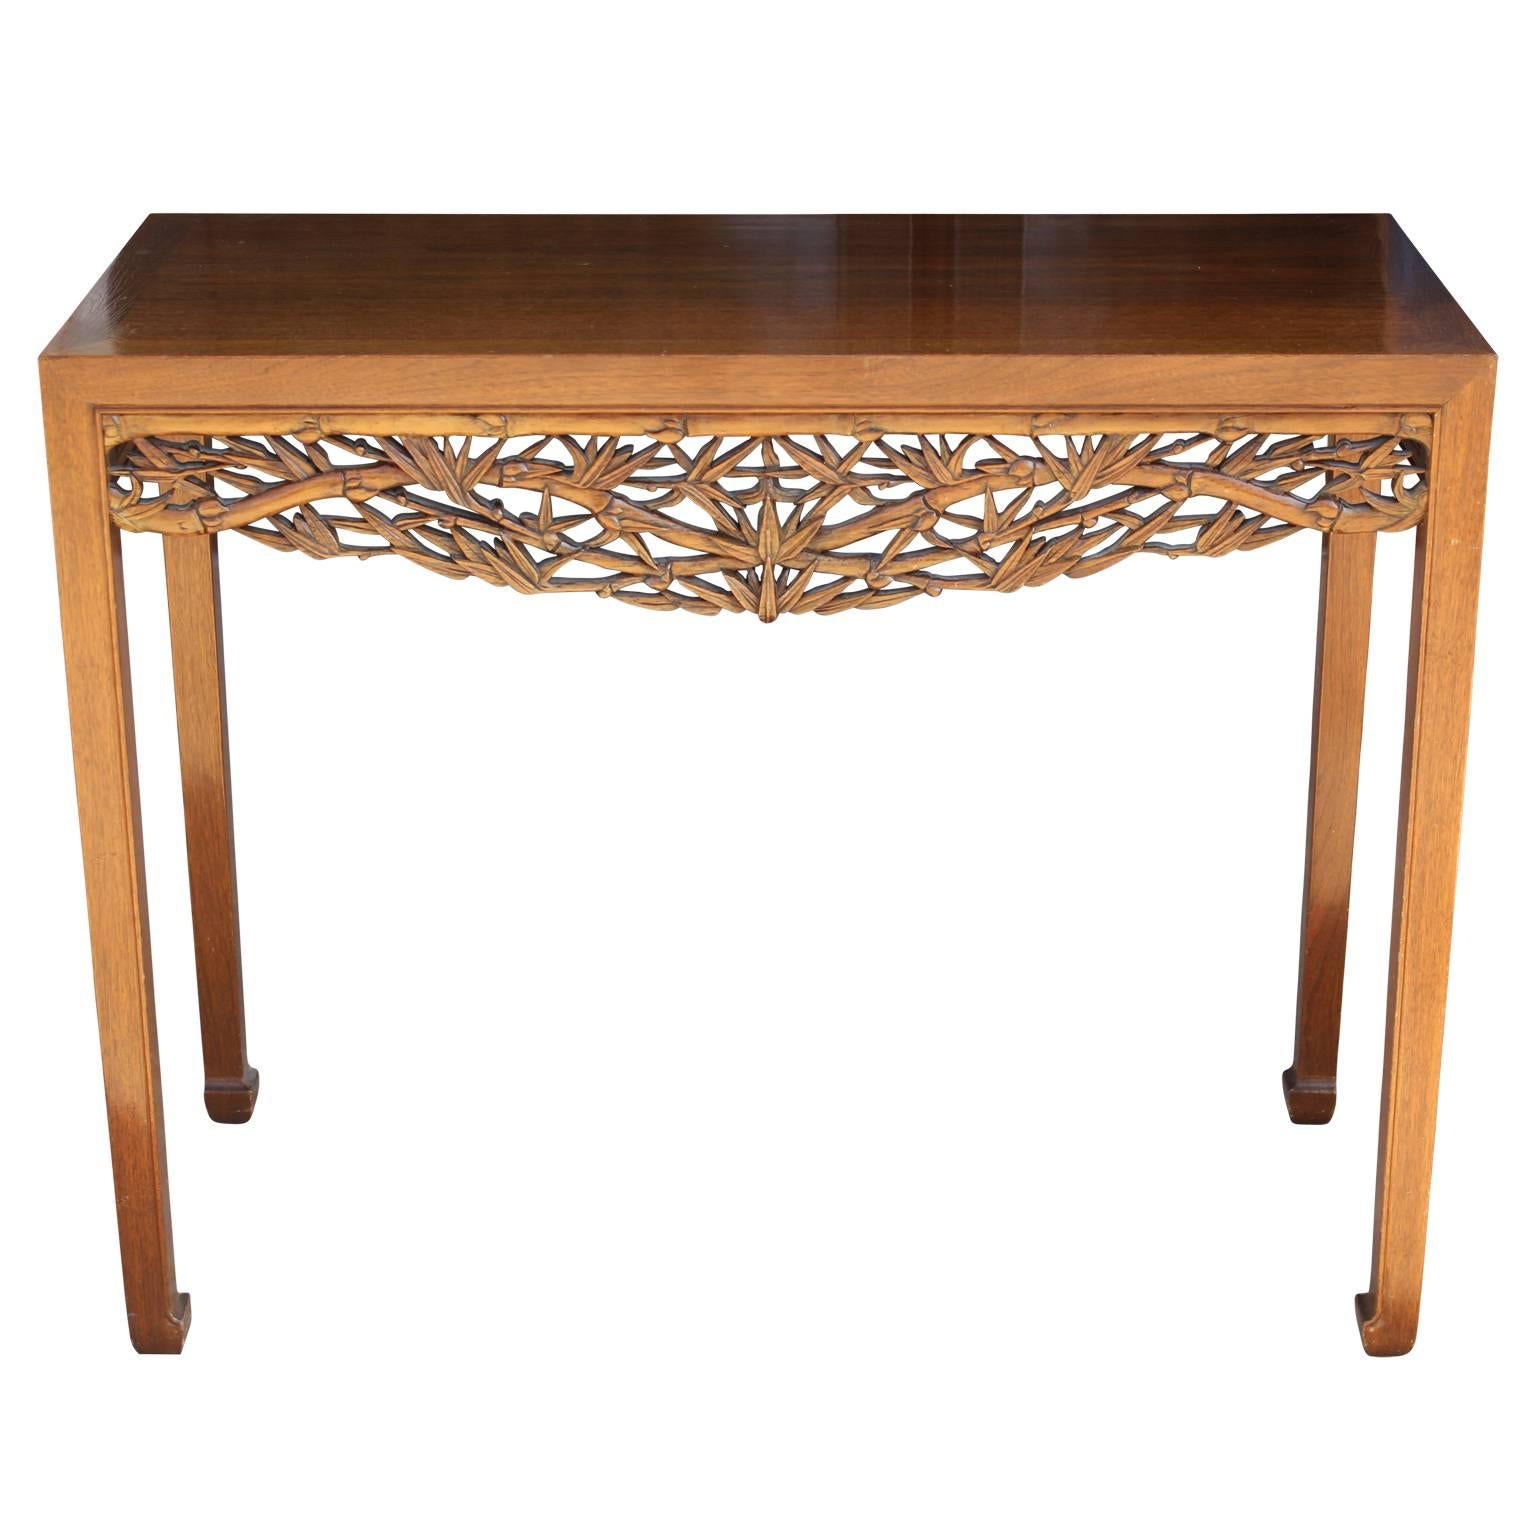 Unique modern console or entryway table with intricate hand-carved Asian motifs. Also features horse-hoof feet displaying a distinct Ming furniture style.  In nice vintage condition. The original clear lacquer has some patina to it. For detail shots